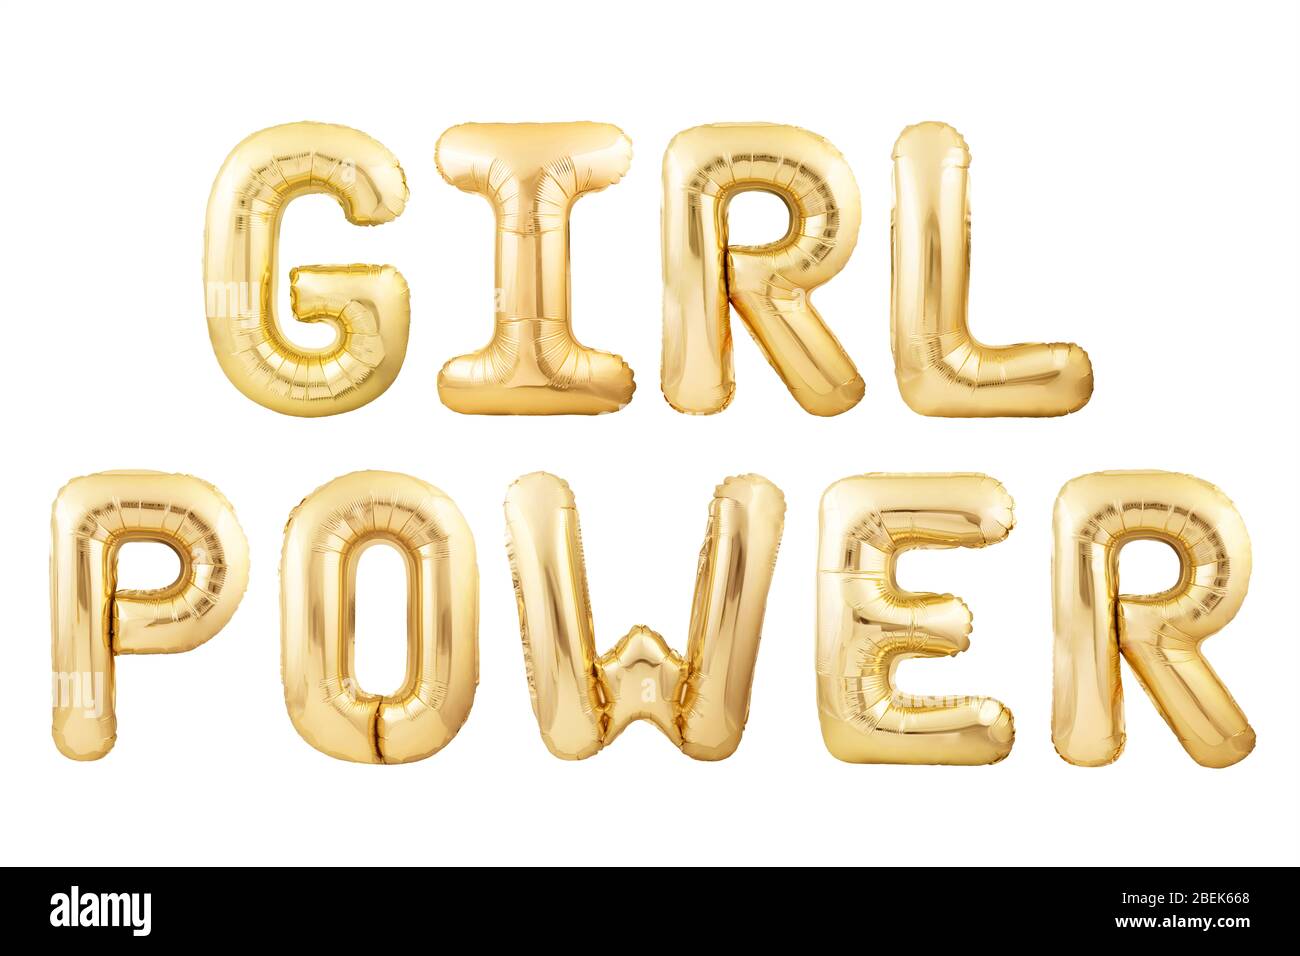 Girl power message made of golden inflatable balloons letters isolated on white background Stock Photo